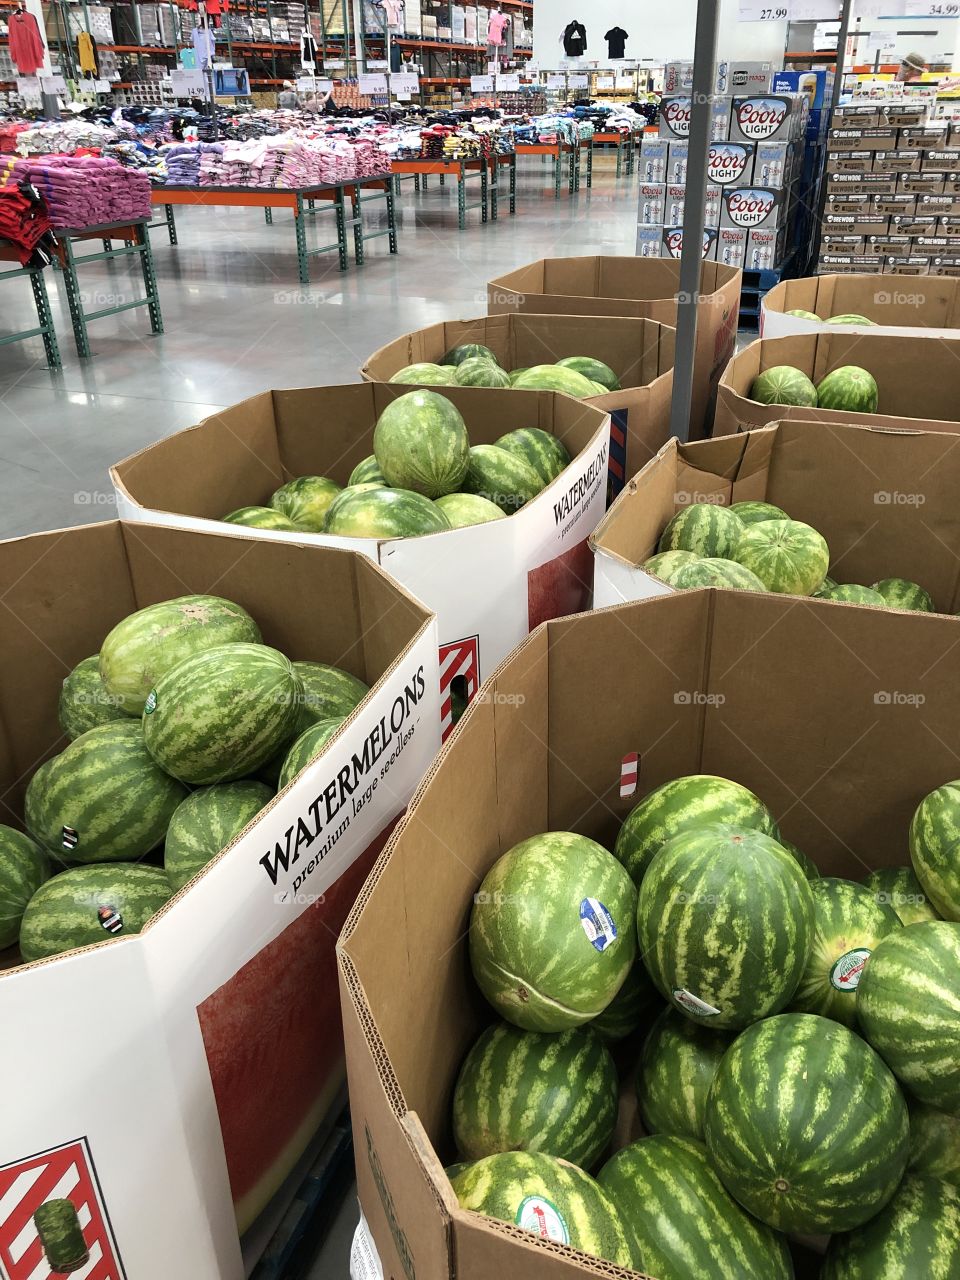 Lots of Watermelons